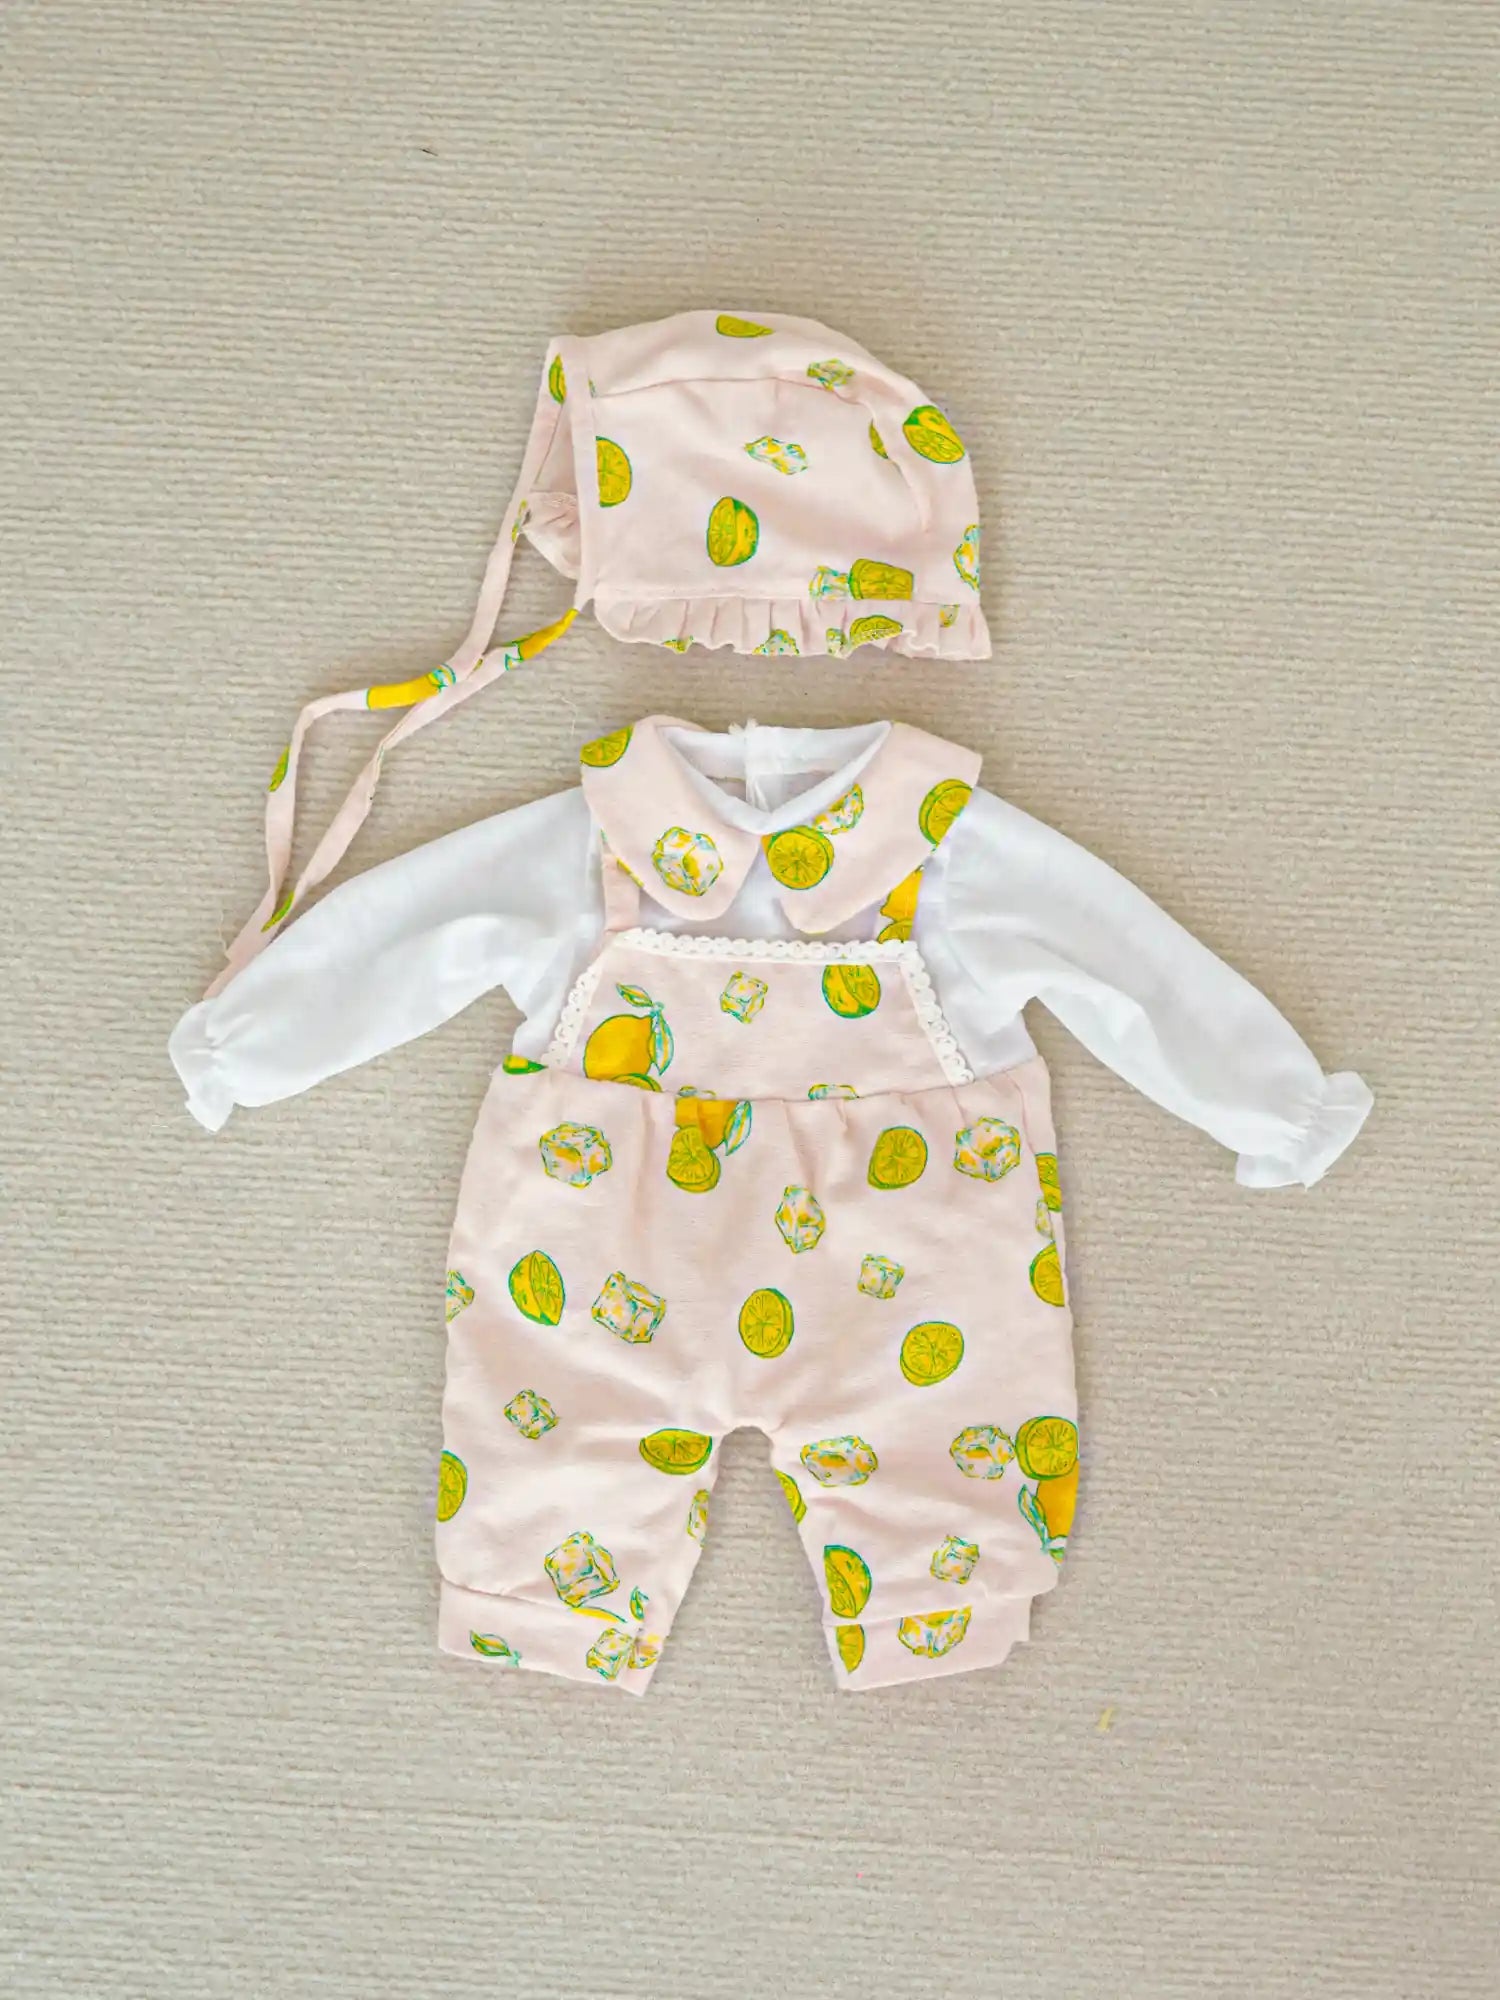 A reborn doll outfit displayed on a neutral background, featuring a pink strap overalls with a lemon print, accompanied by a matching bonnet and a white long-sleeved undershirt.